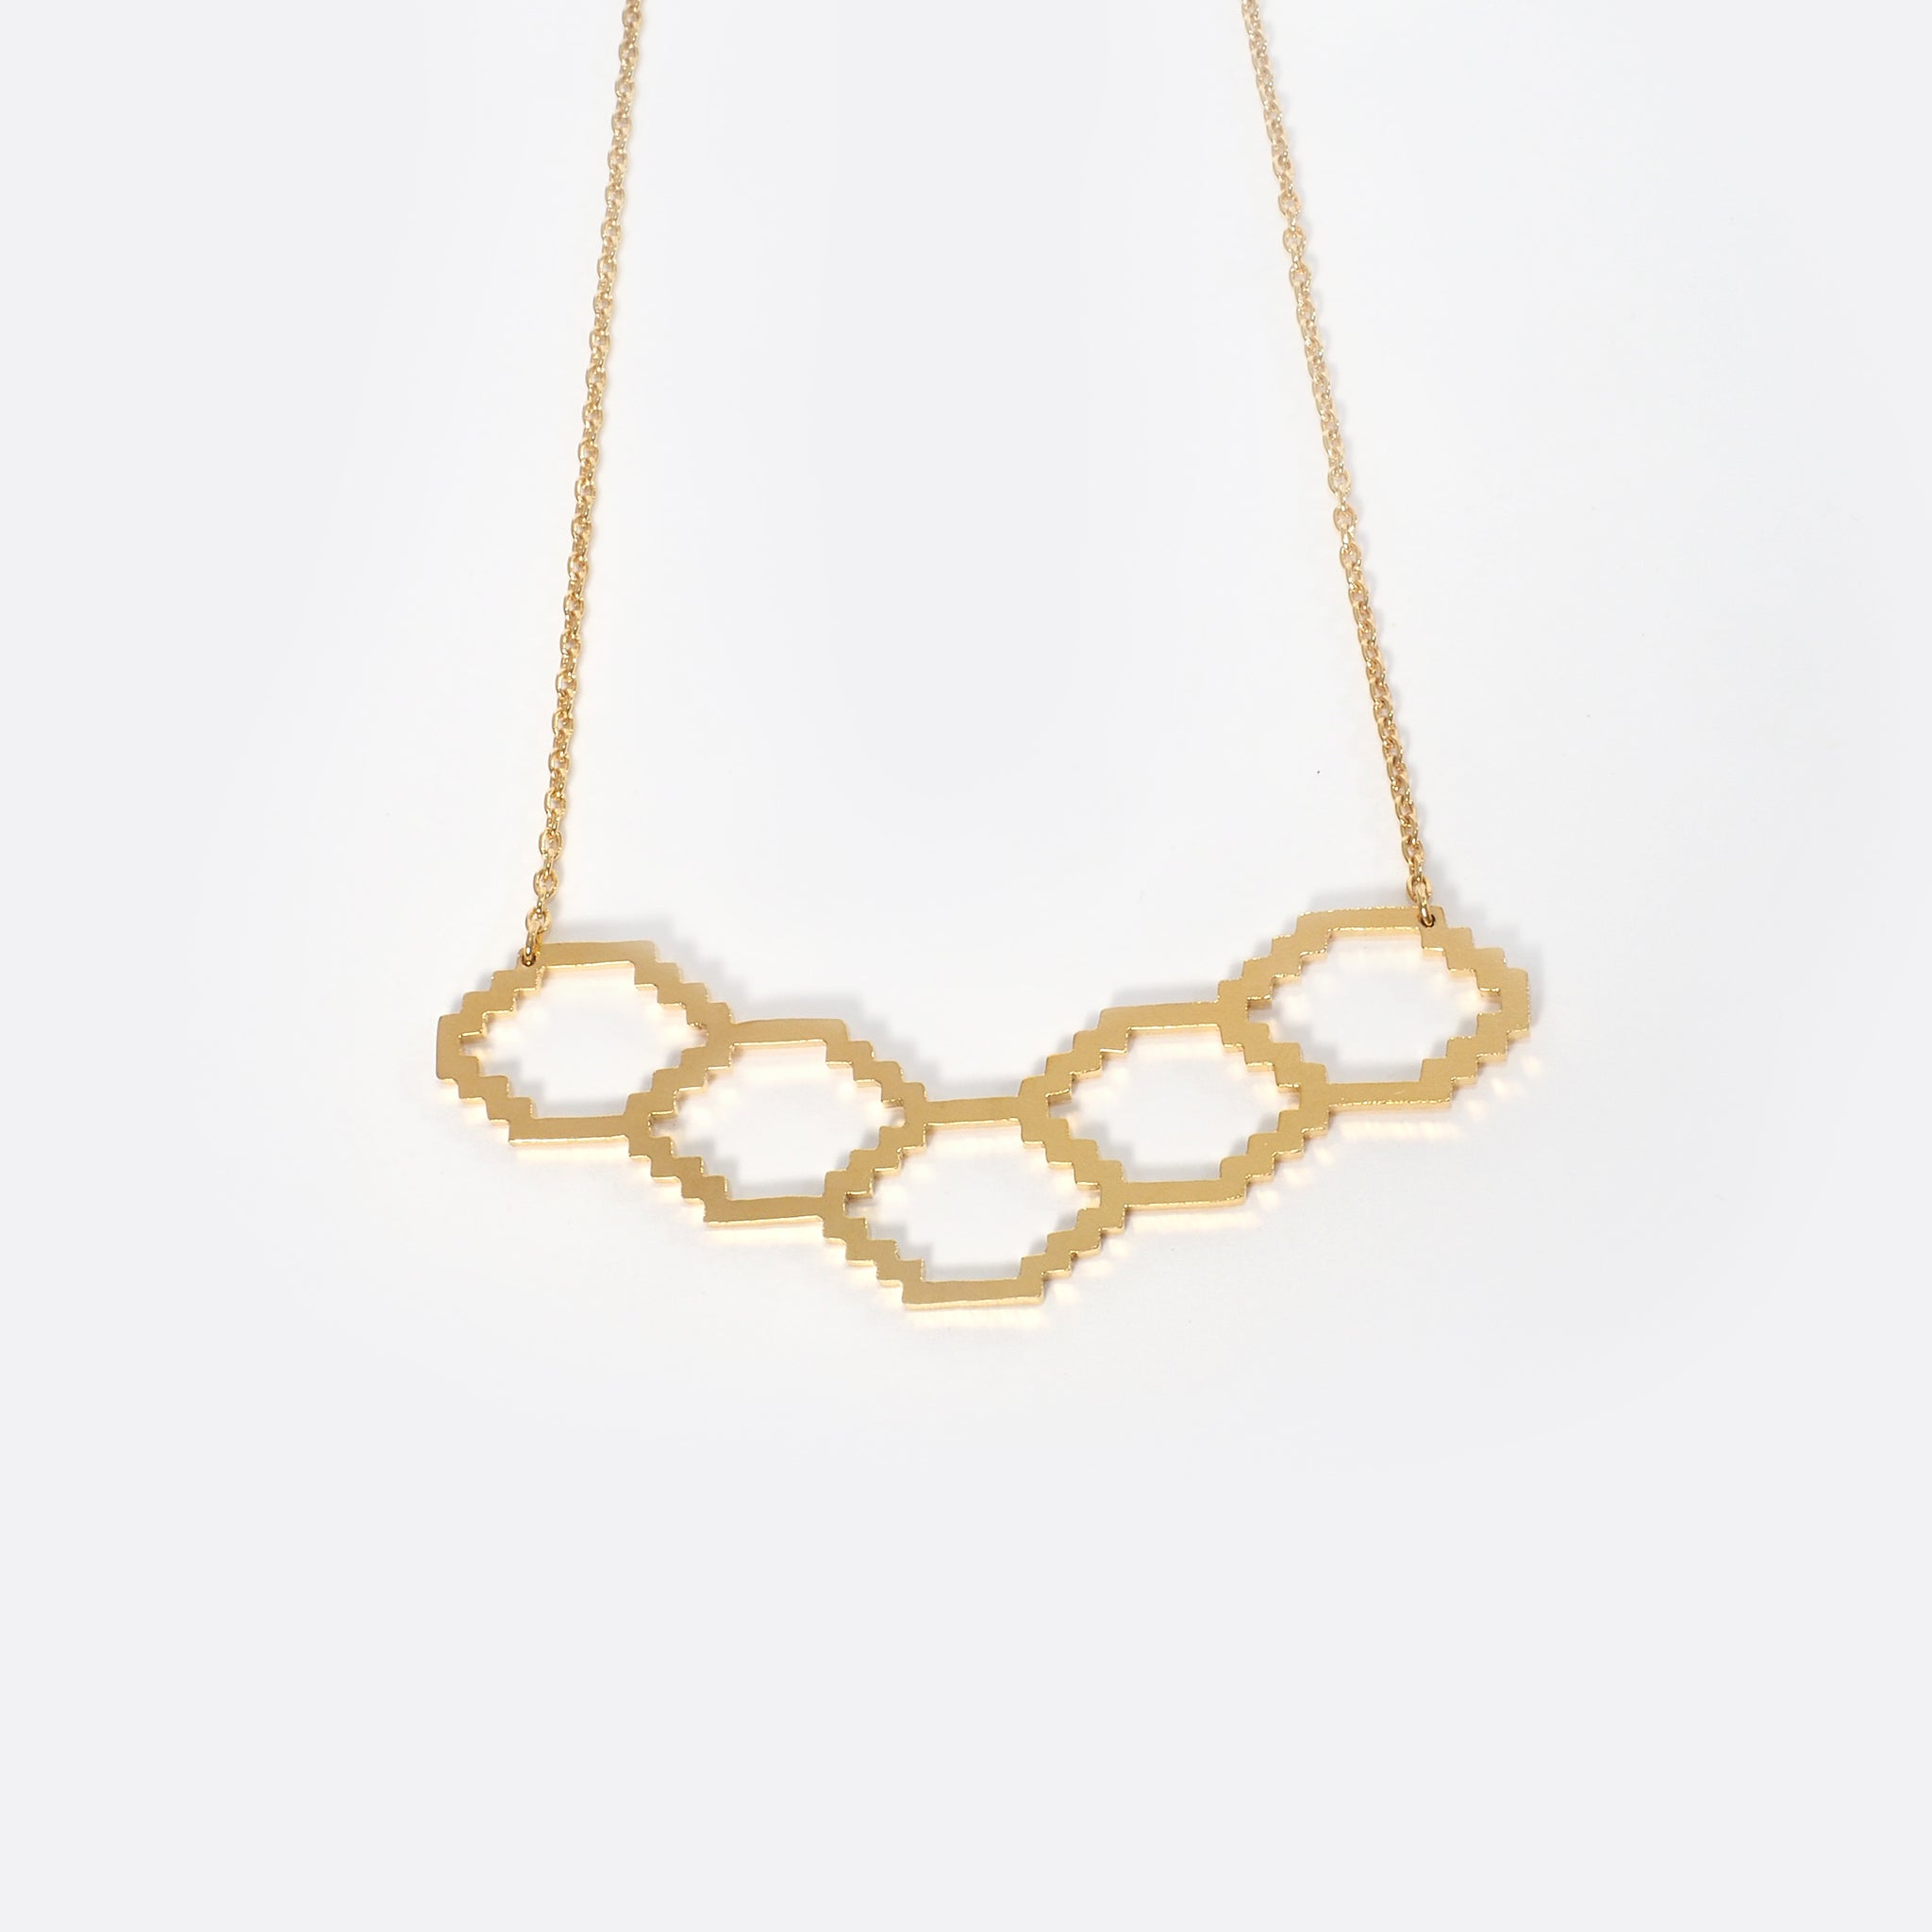 Homage To Dhaka N°1 – Big Gold- Plated Necklace